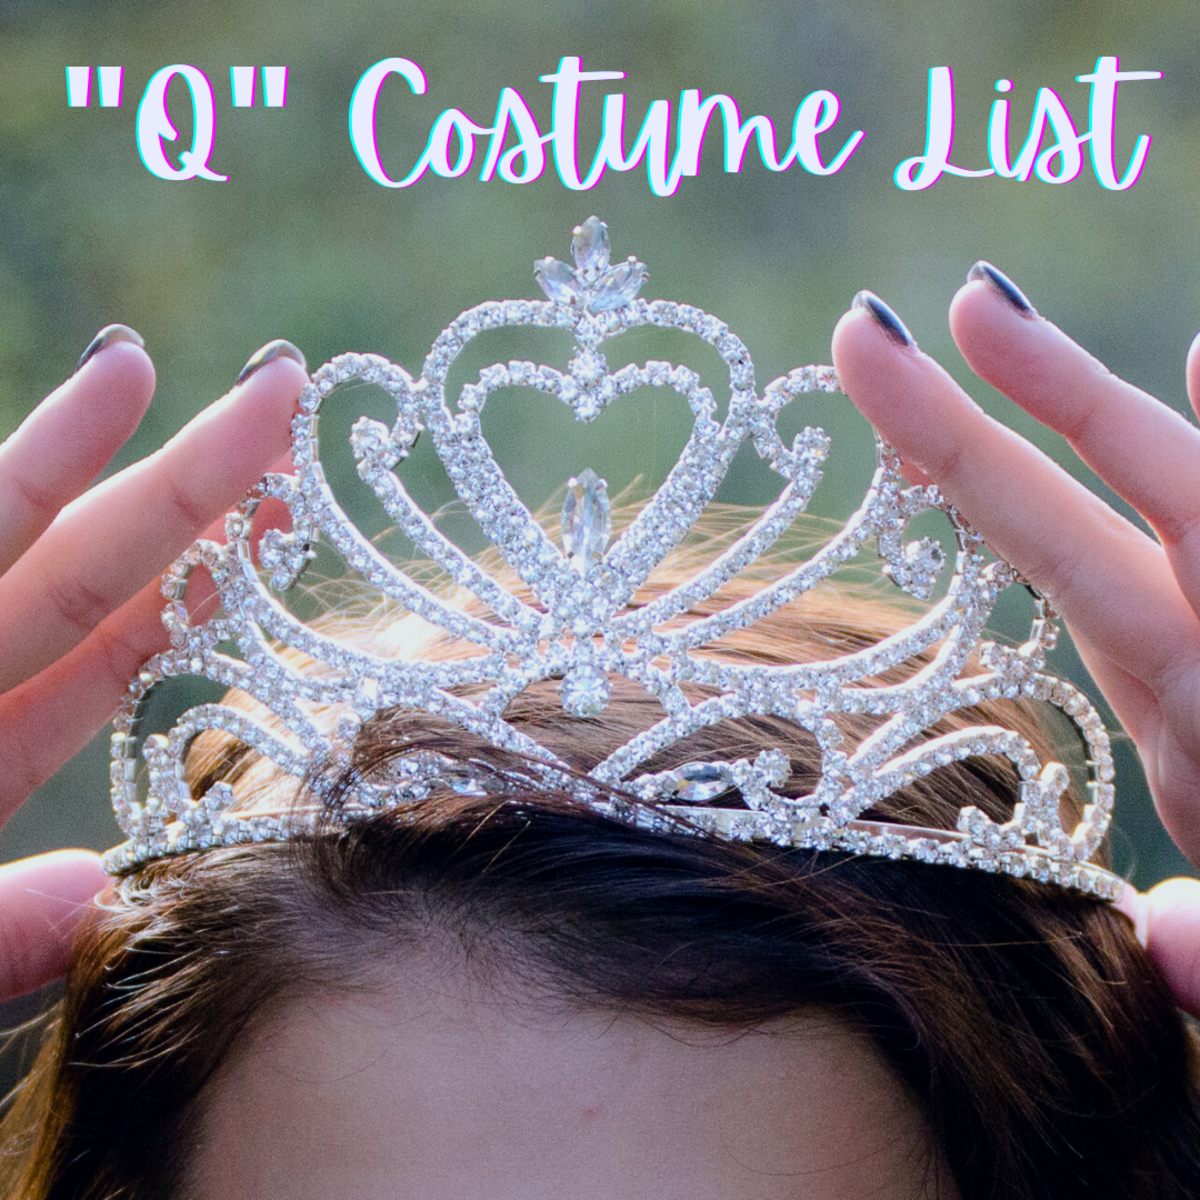 Here is a list of 30+ costume ideas beginning with the letter "Q" for a letter-themed costume party!